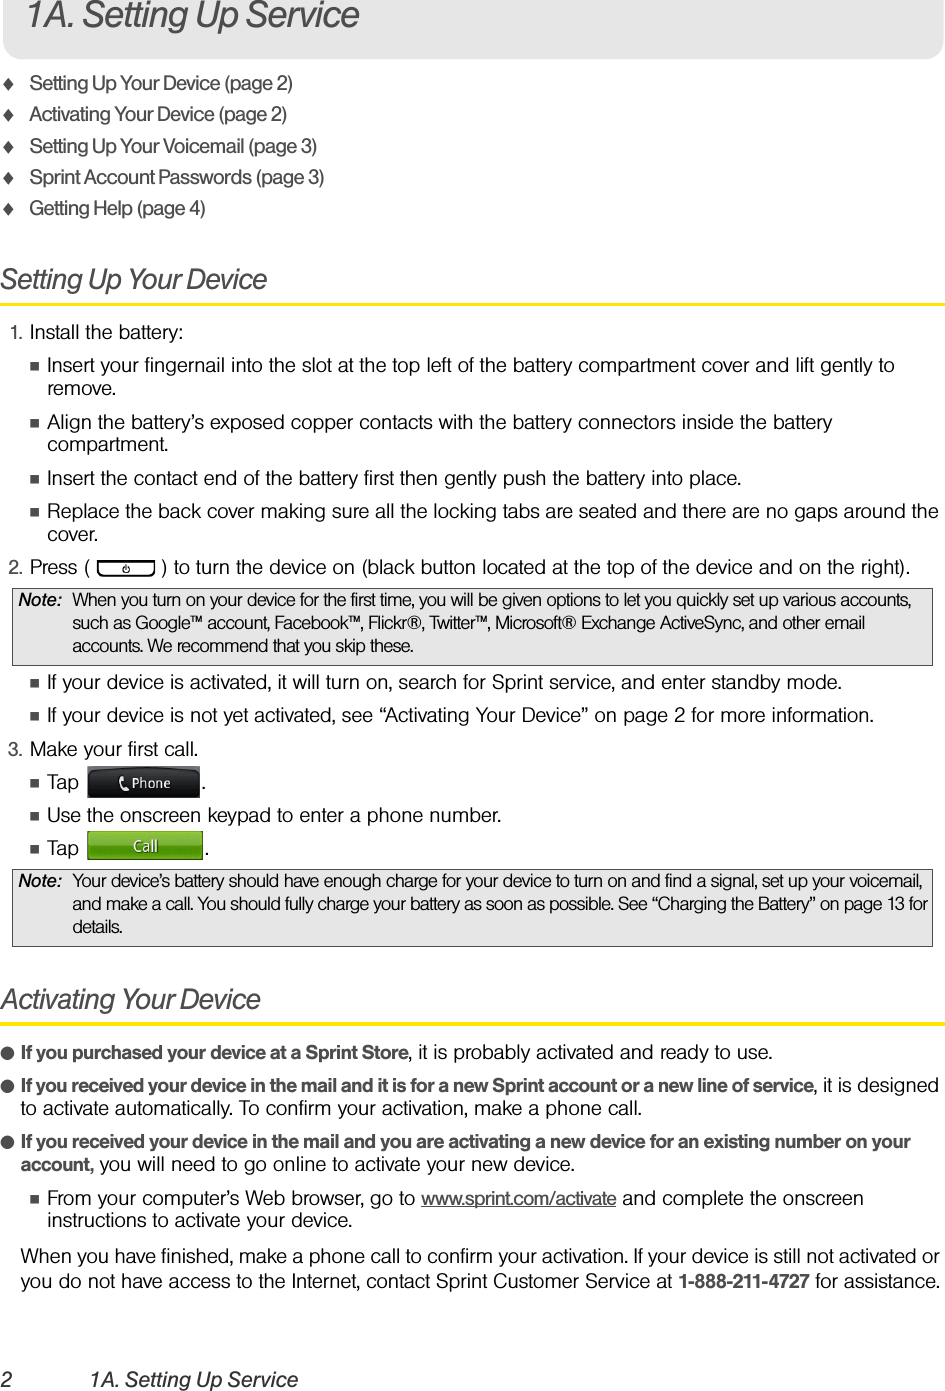 2 1A. Setting Up ServiceࡗSetting Up Your Device (page 2)ࡗActivating Your Device (page 2)ࡗSetting Up Your Voicemail (page 3) ࡗSprint Account Passwords (page 3)ࡗGetting Help (page 4)Setting Up Your Device1. Install the battery:ⅢInsert your fingernail into the slot at the top left of the battery compartment cover and lift gently to remove.ⅢAlign the battery’s exposed copper contacts with the battery connectors inside the battery compartment.ⅢInsert the contact end of the battery first then gently push the battery into place.ⅢReplace the back cover making sure all the locking tabs are seated and there are no gaps around the cover.2. Press (   ) to turn the device on (black button located at the top of the device and on the right).ⅢIf your device is activated, it will turn on, search for Sprint service, and enter standby mode.ⅢIf your device is not yet activated, see “Activating Your Device” on page 2 for more information.3. Make your first call.ⅢTap .ⅢUse the onscreen keypad to enter a phone number.ⅢTap .Activating Your DeviceⅷIf you purchased your device at a Sprint Store, it is probably activated and ready to use.ⅷIf you received your device in the mail and it is for a new Sprint account or a new line of service, it is designed to activate automatically. To confirm your activation, make a phone call.ⅷIf you received your device in the mail and you are activating a new device for an existing number on your account, you will need to go online to activate your new device.ⅢFrom your computer’s Web browser, go to www.sprint.com/activate and complete the onscreen instructions to activate your device.When you have finished, make a phone call to confirm your activation. If your device is still not activated or you do not have access to the Internet, contact Sprint Customer Service at 1-888-211-4727 for assistance.Note: When you turn on your device for the first time, you will be given options to let you quickly set up various accounts, such as Google™ account, Facebook™, Flickr®, Twitter™, Microsoft® Exchange ActiveSync, and other email accounts. We recommend that you skip these.Note: Your device’s battery should have enough charge for your device to turn on and find a signal, set up your voicemail, and make a call. You should fully charge your battery as soon as possible. See “Charging the Battery” on page 13 for details.1A. Setting Up Service